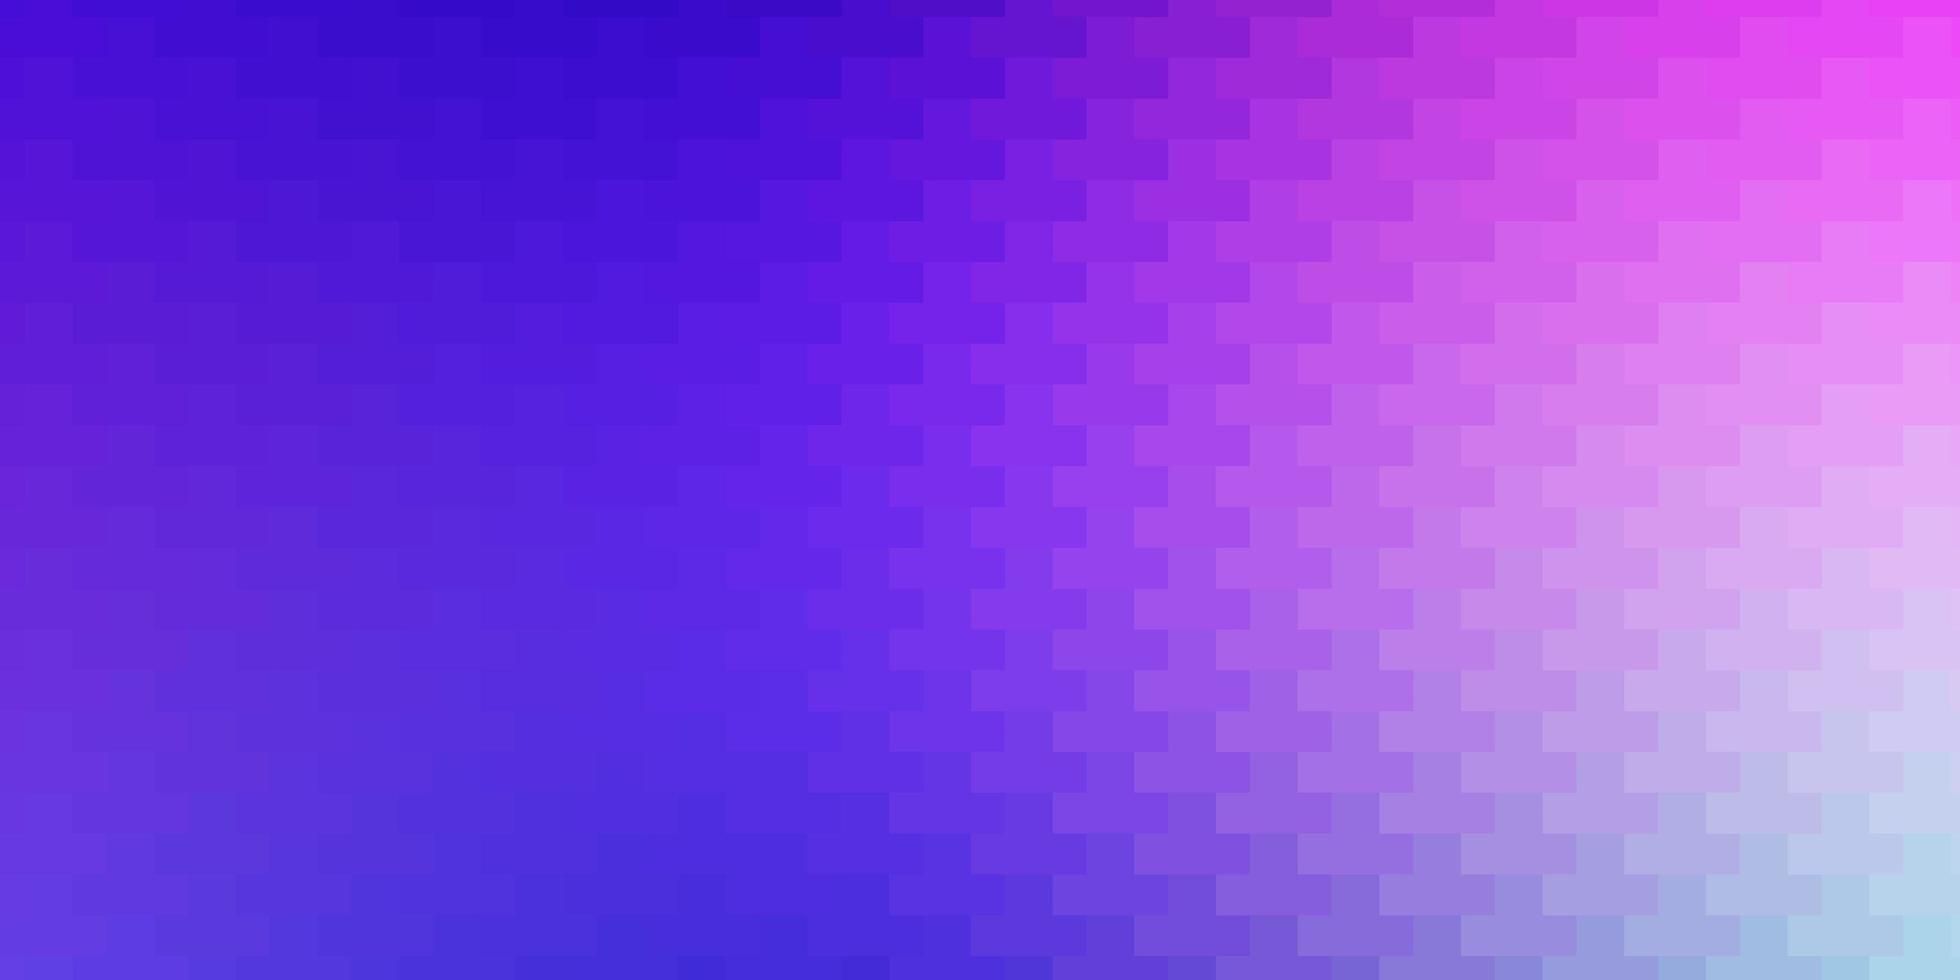 Light Pink, Blue vector background with rectangles